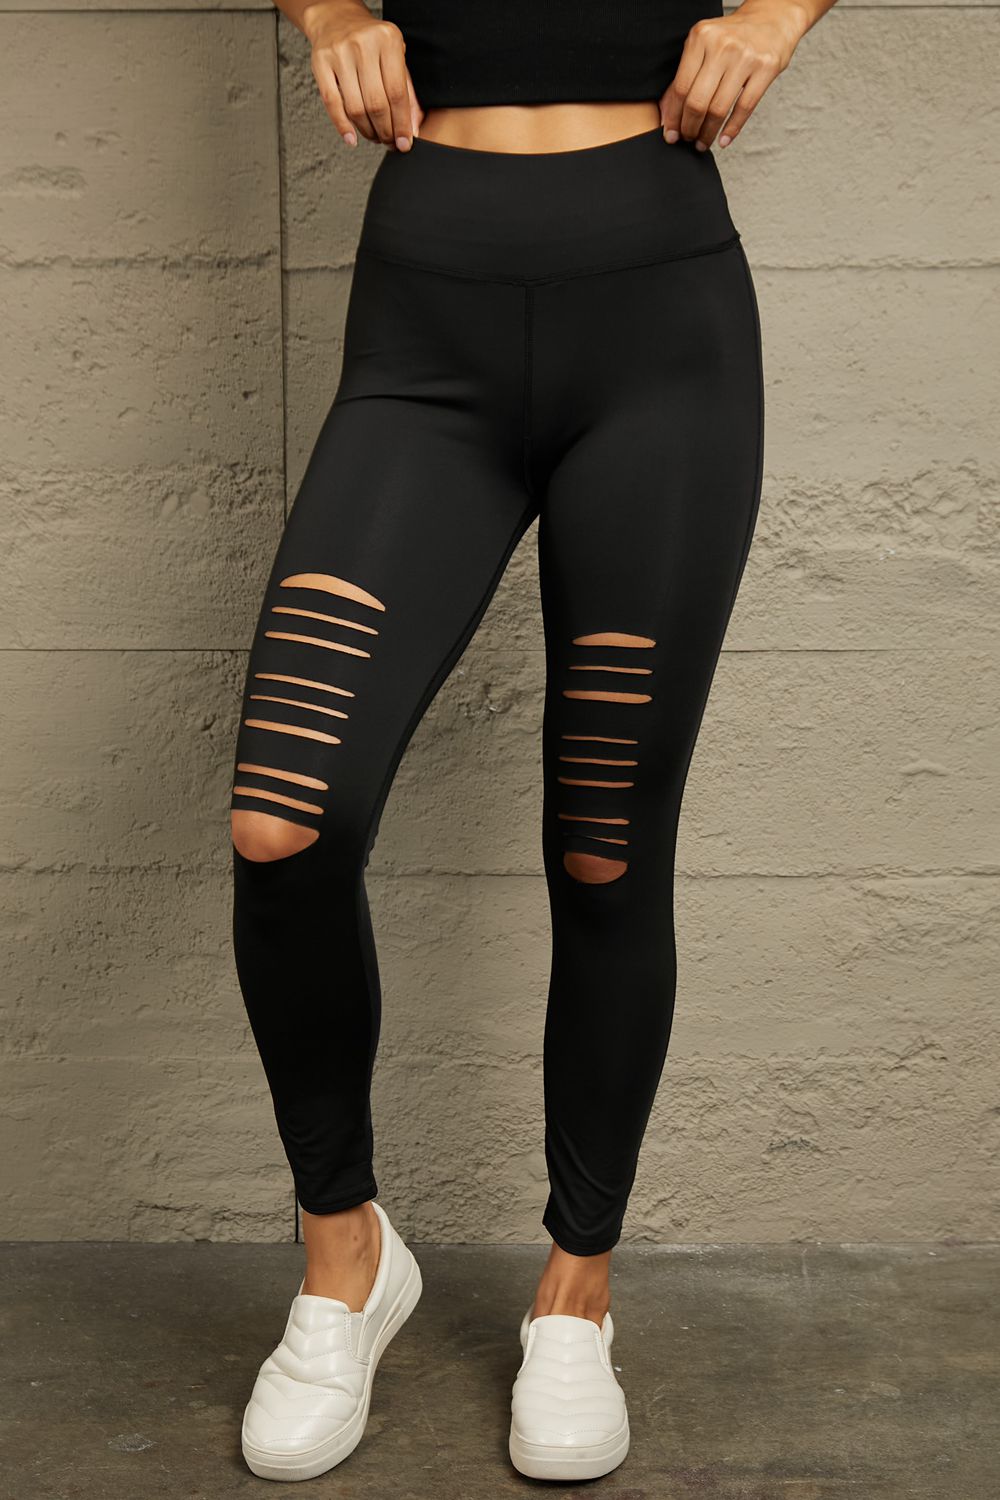 Double Take Wide Waistband Distressed Slim Fit Leggings - Leggings - FITGGINS